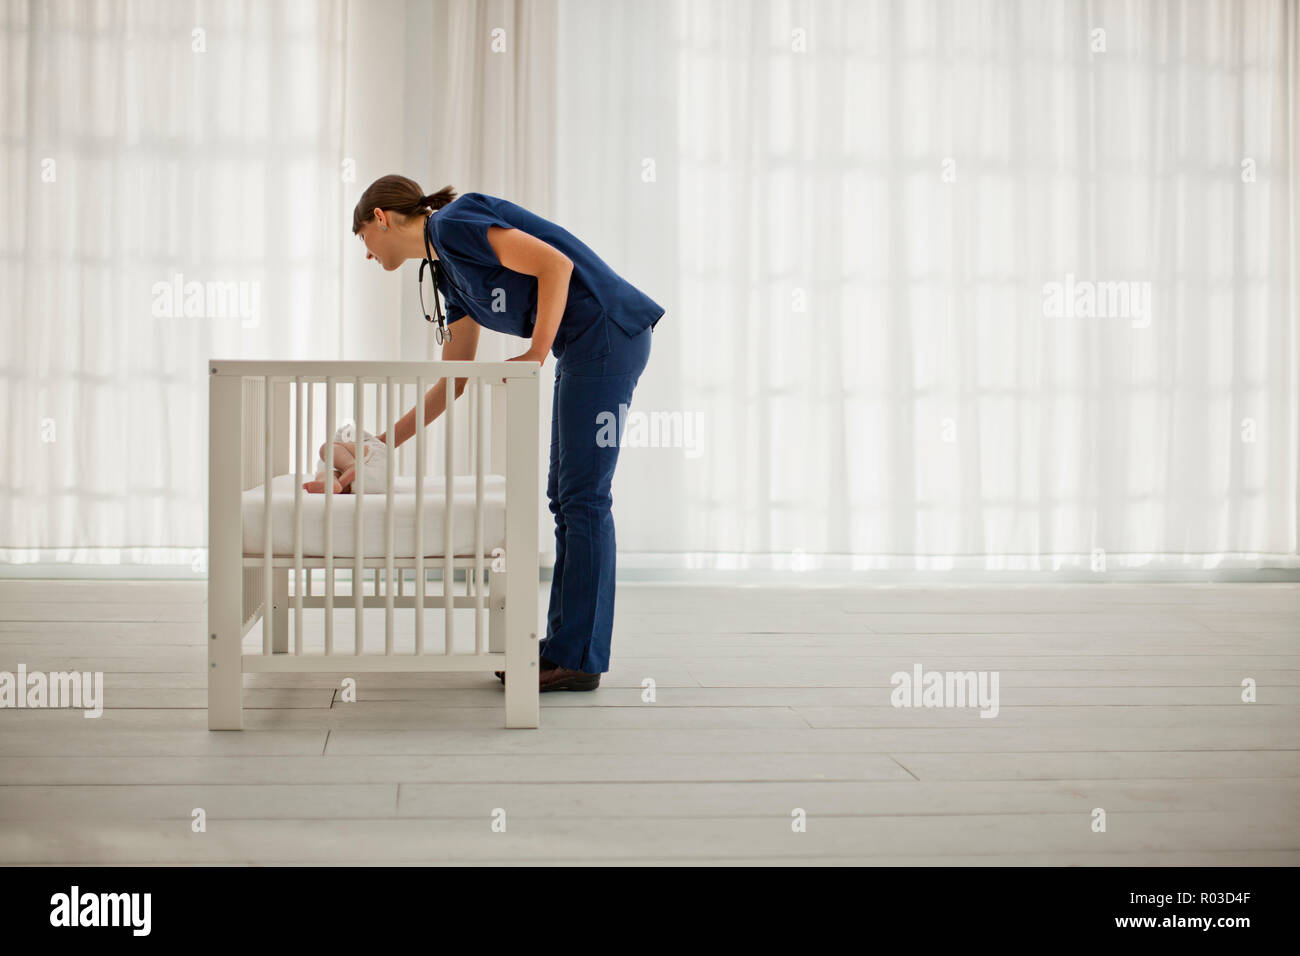 Young nurse bending over a sleeping baby's cot to gently check on him. Stock Photo